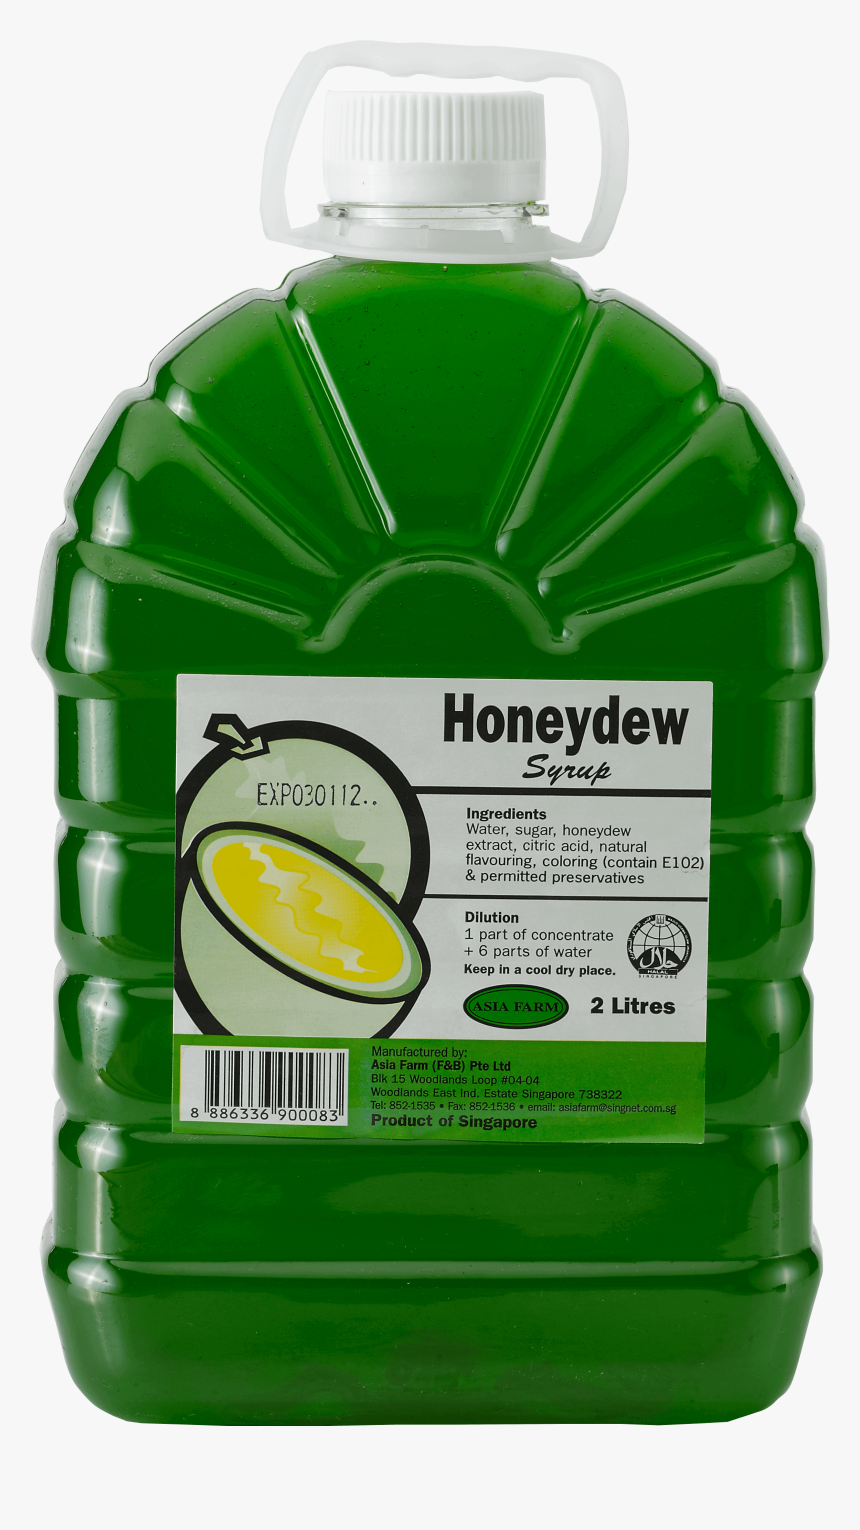 Honeydew Syrup - Asia Farm Honeydew Syrup, HD Png Download, Free Download